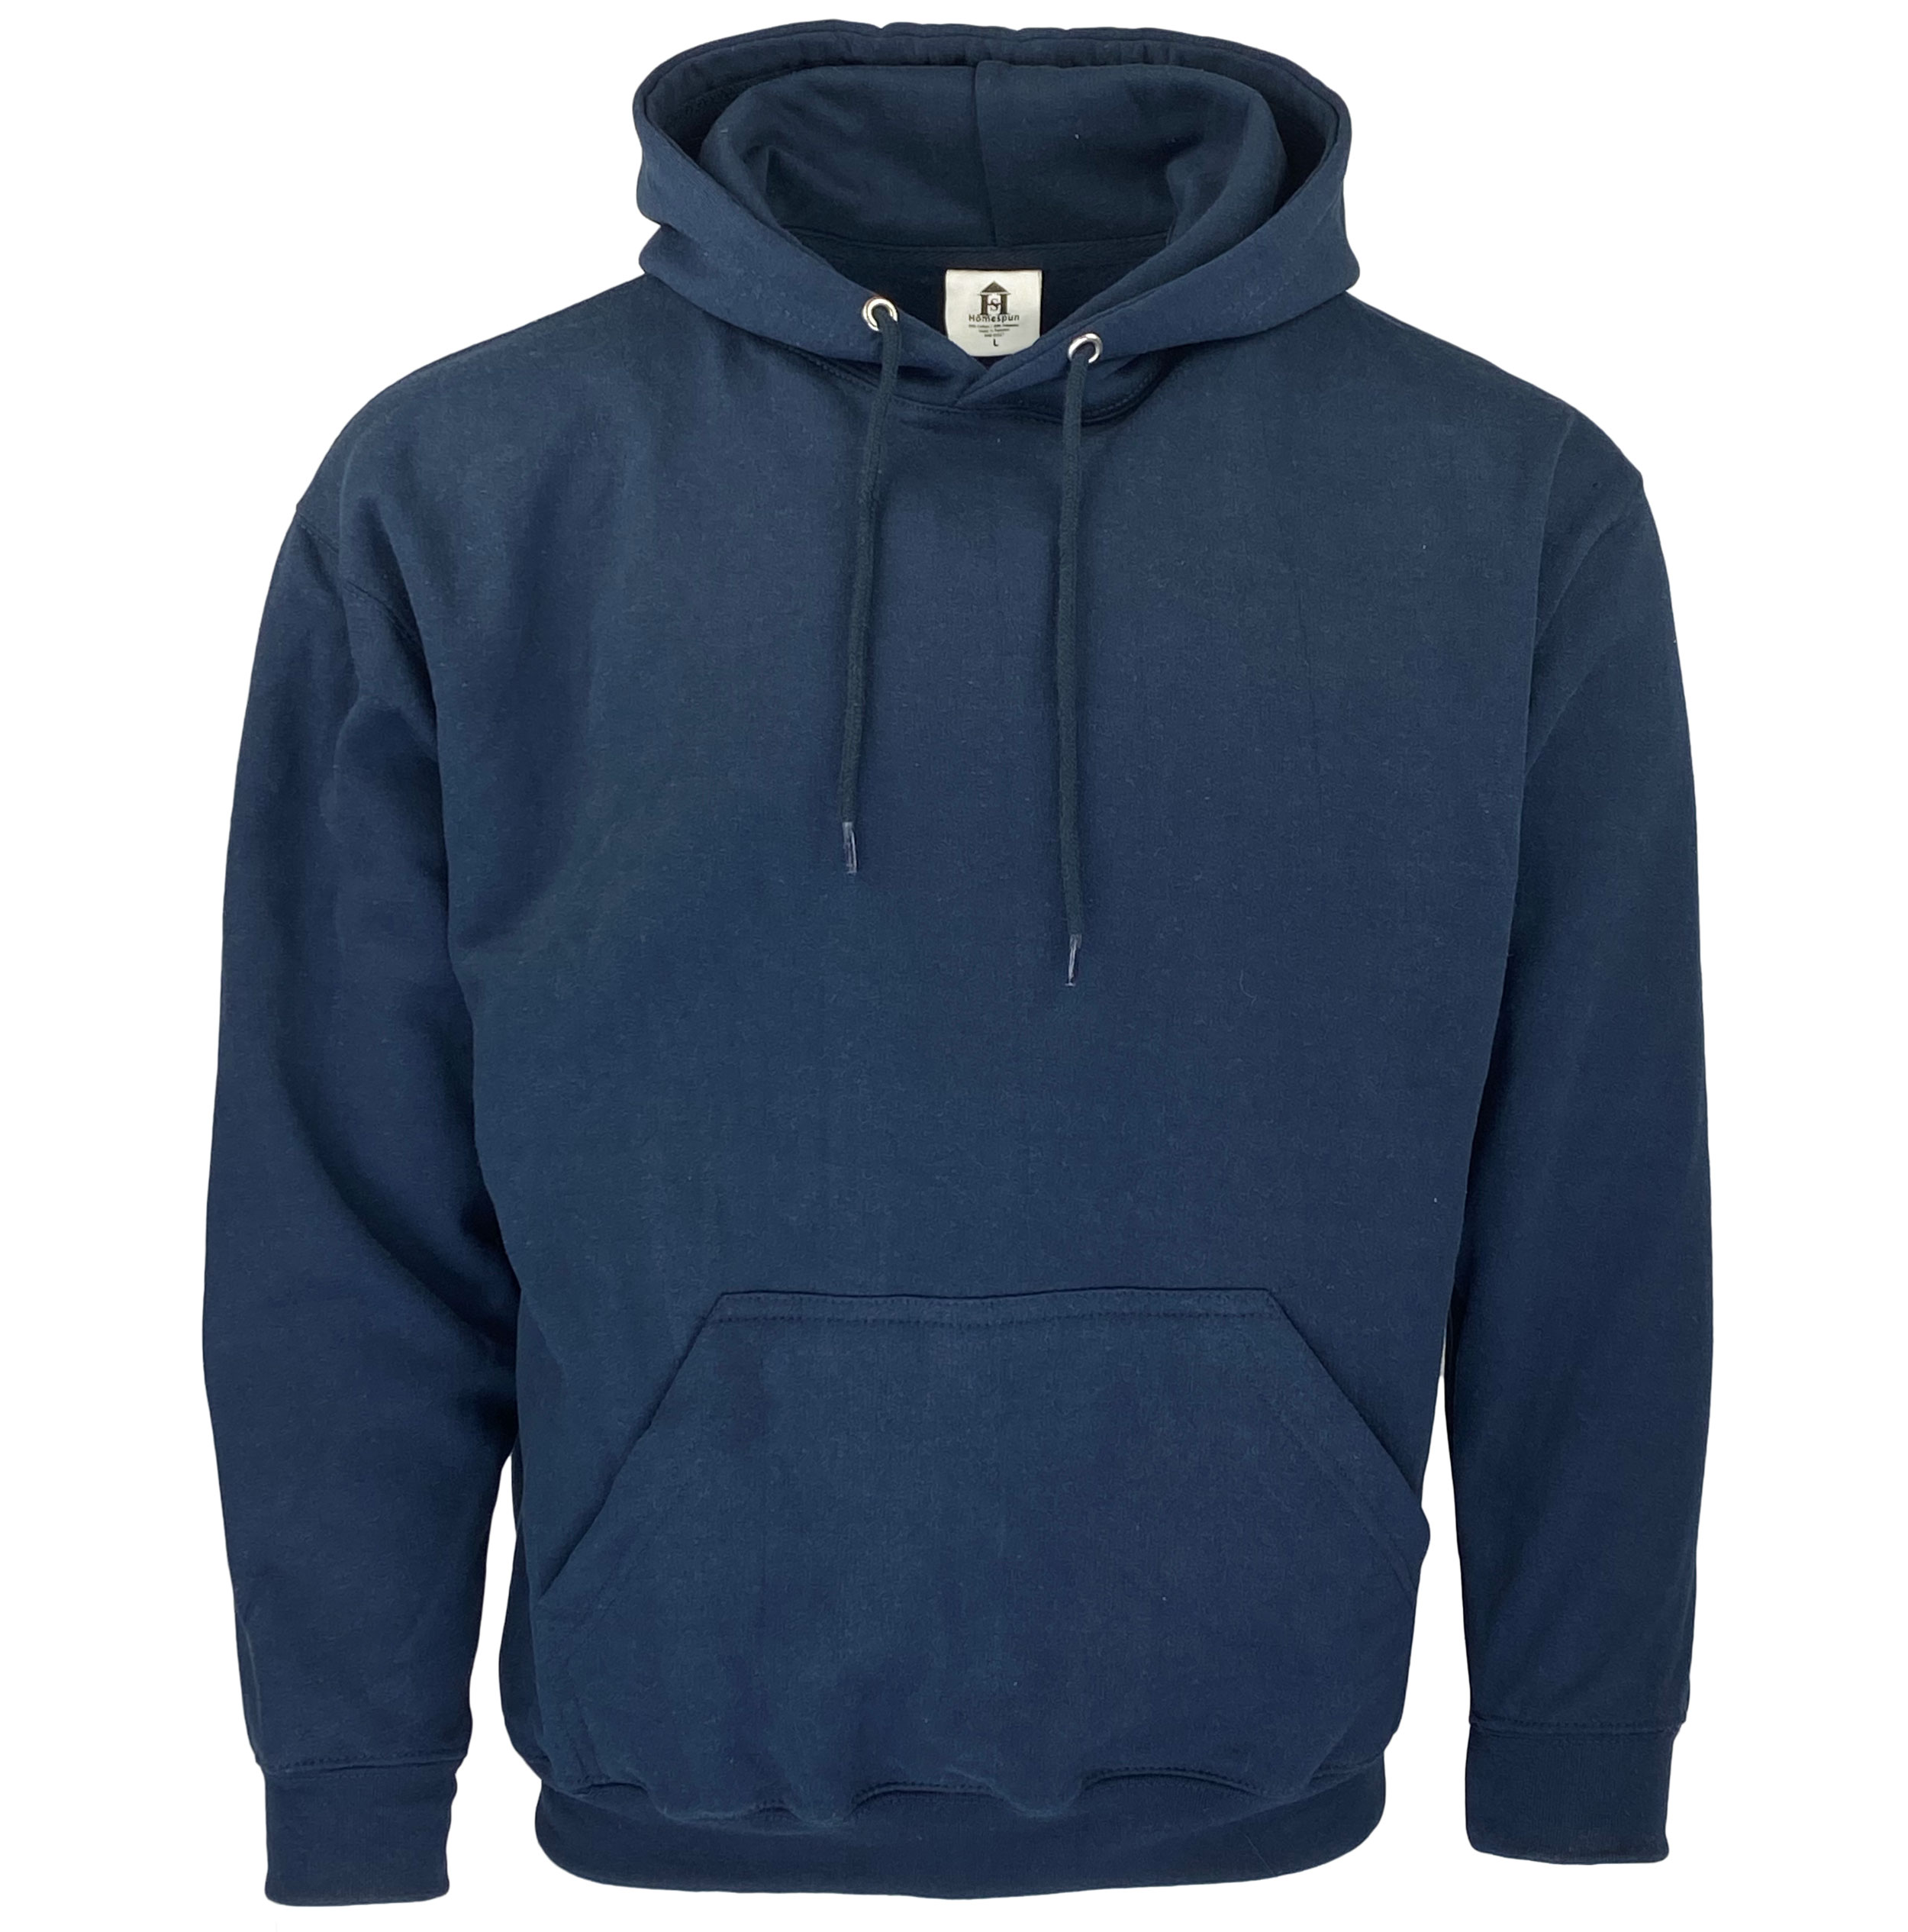 Style H14NV | Wholesale First Quality Fleece Pullover Hoodies - Navy